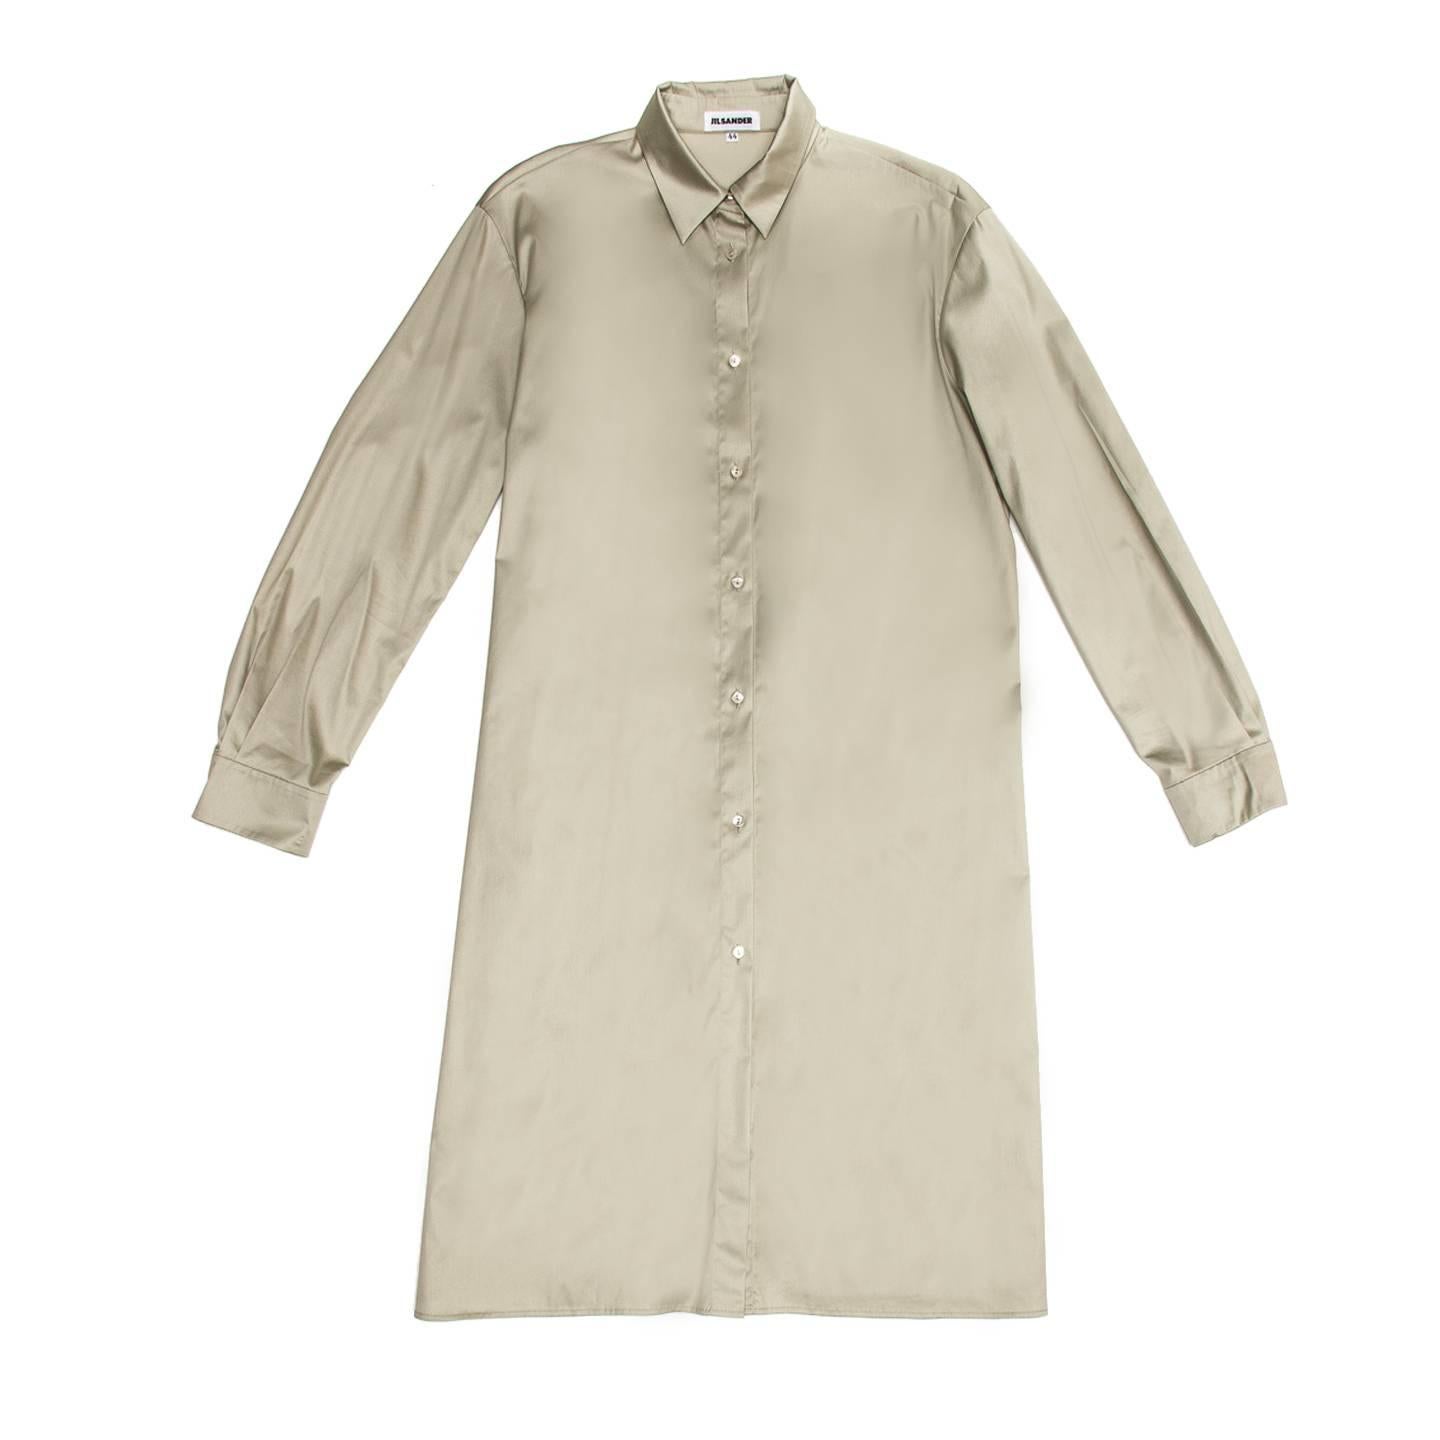 Khaki cotton blend shirt dress with straight fit and below knee length. The shirt collar is peter pan style, the front opens from neck to hem and is enriched by little mother-of-pearl buttons. The sleeves are long with shirt cuffs and pleats while a